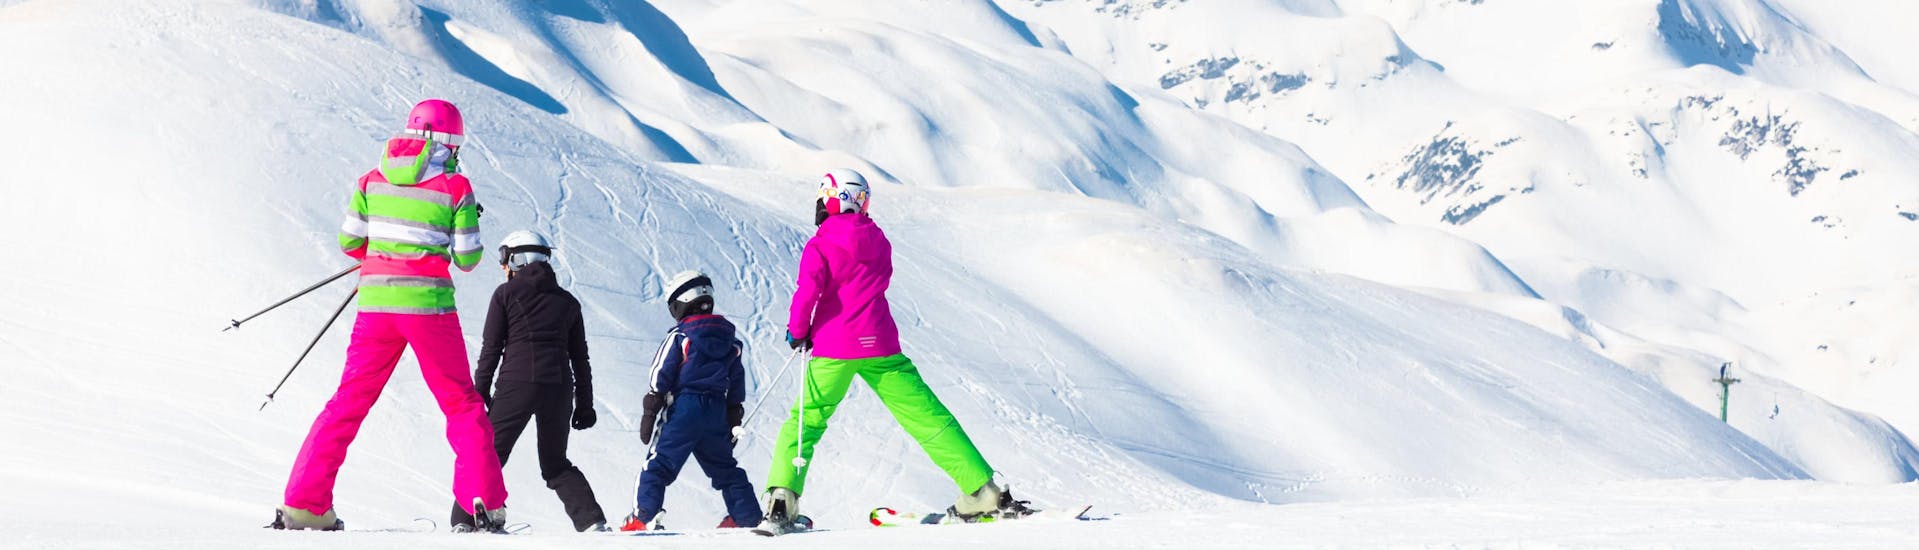 A family is skiing down the slopes of Vogel Ski Center in Slovenia, where local ski schools offer their ski lessons.